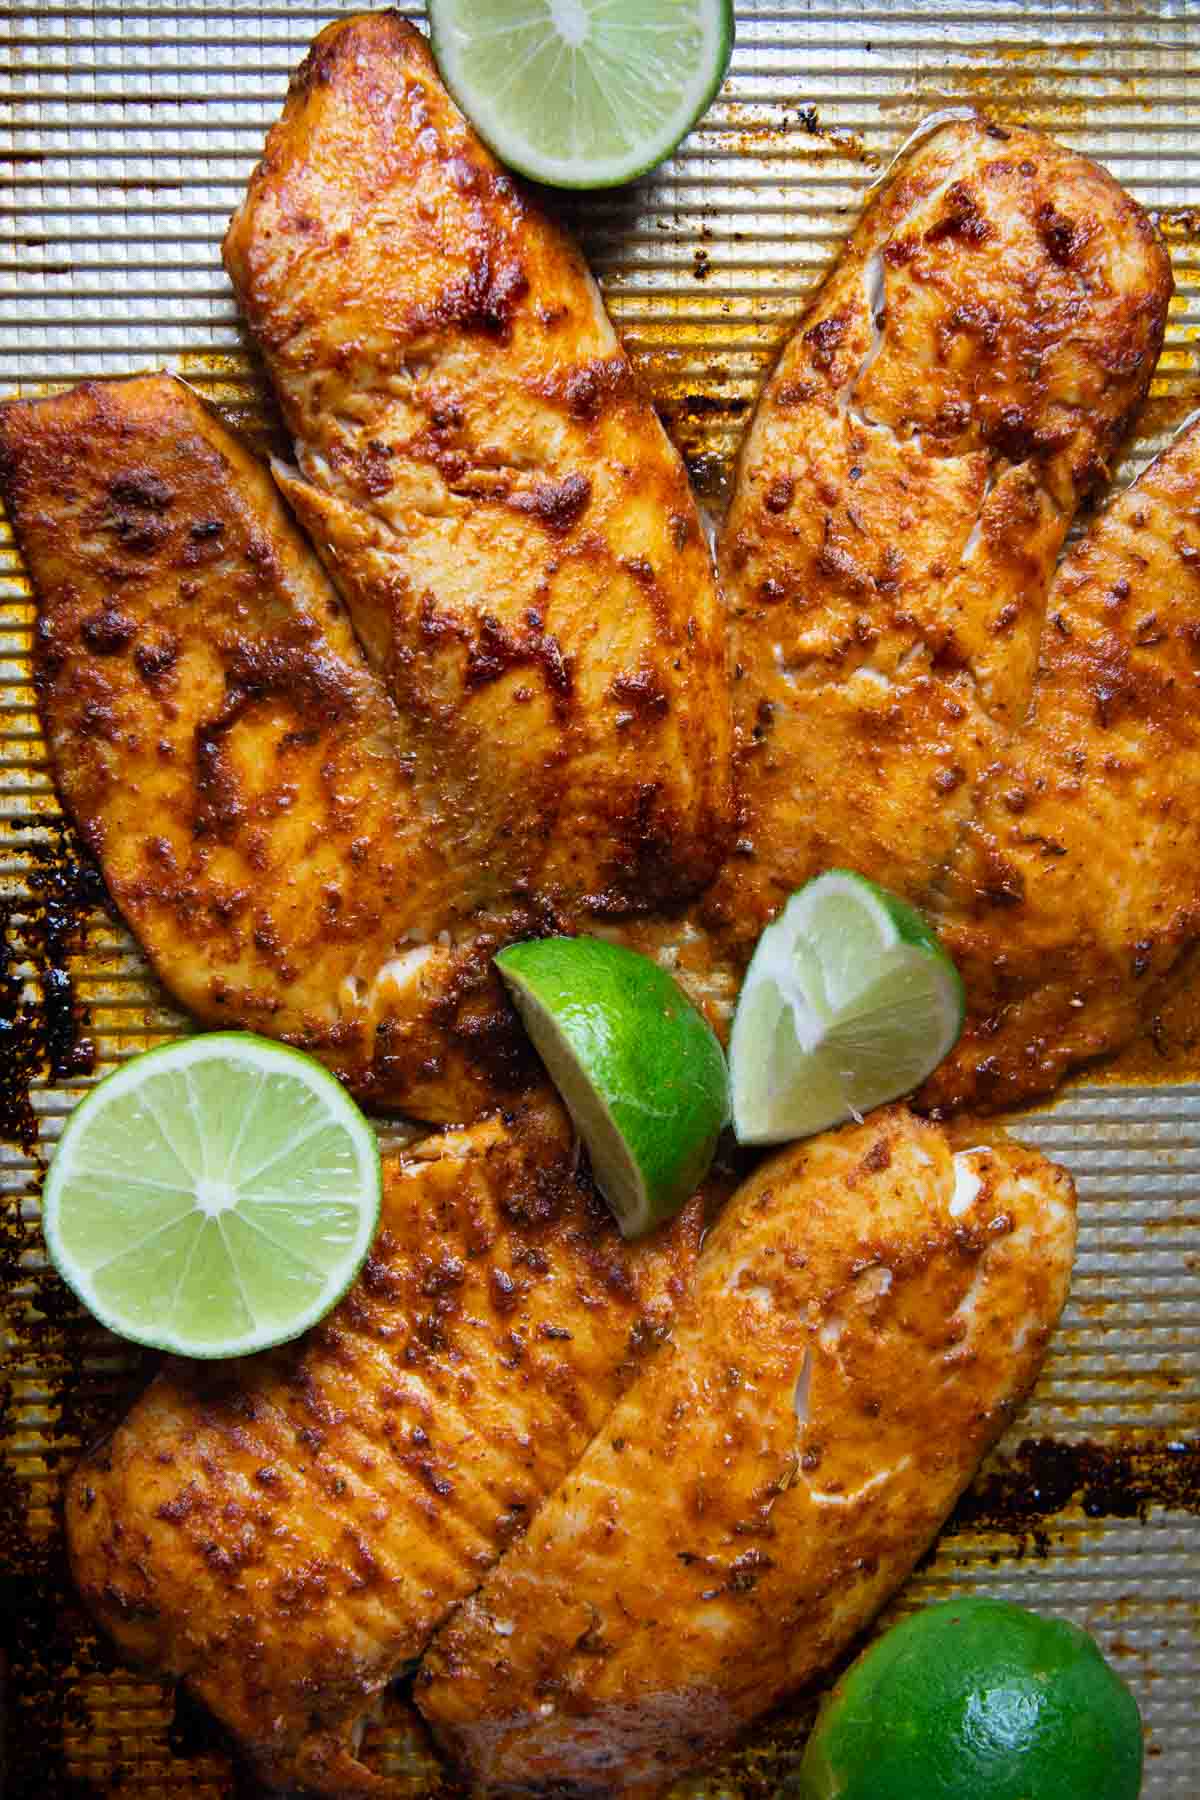 blackened seasoned fish on a baking sheet with limes